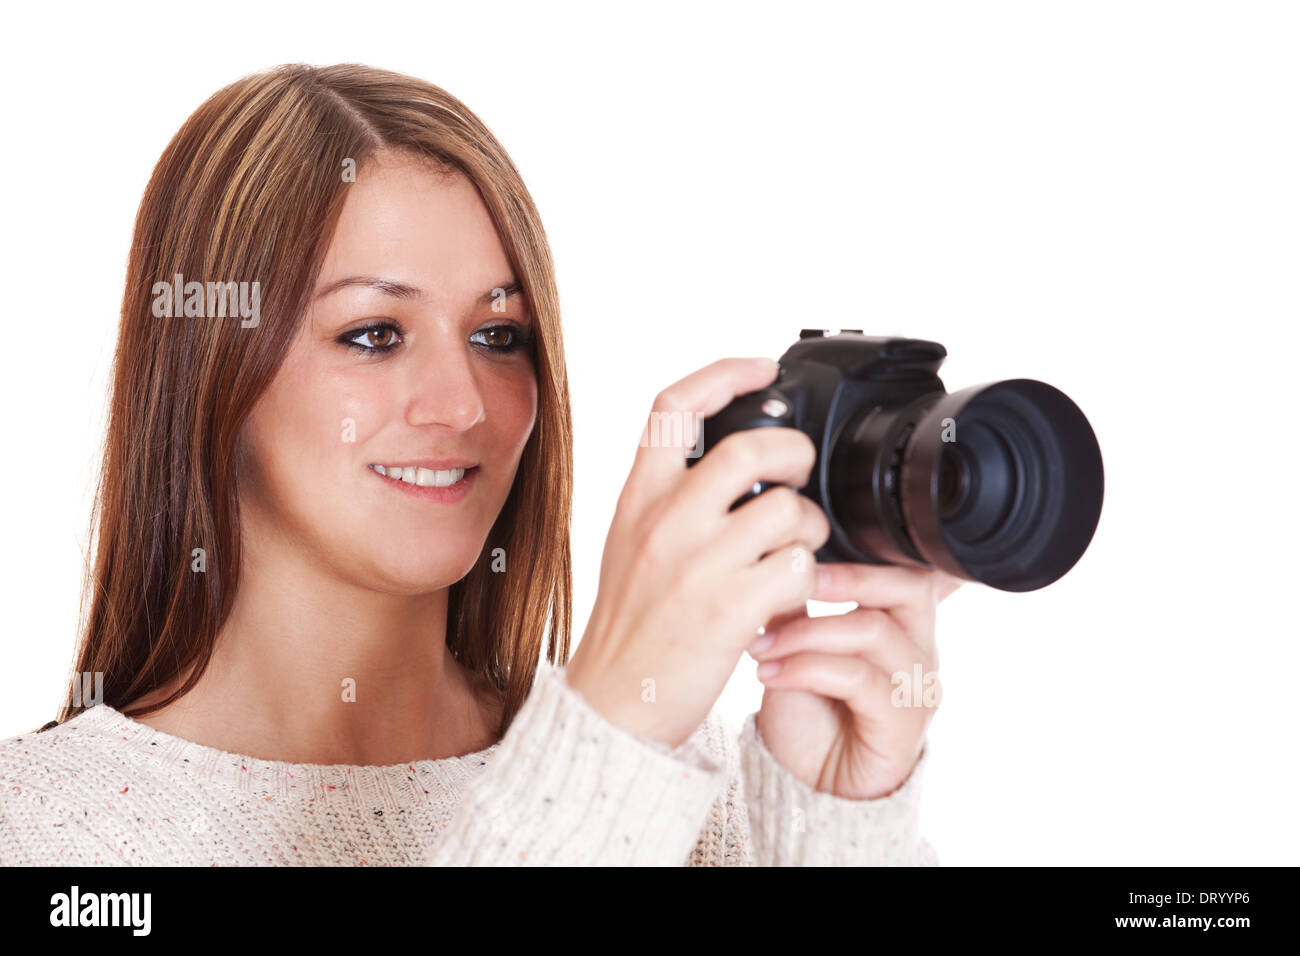 Young woman using camera. All on white background. Stock Photo